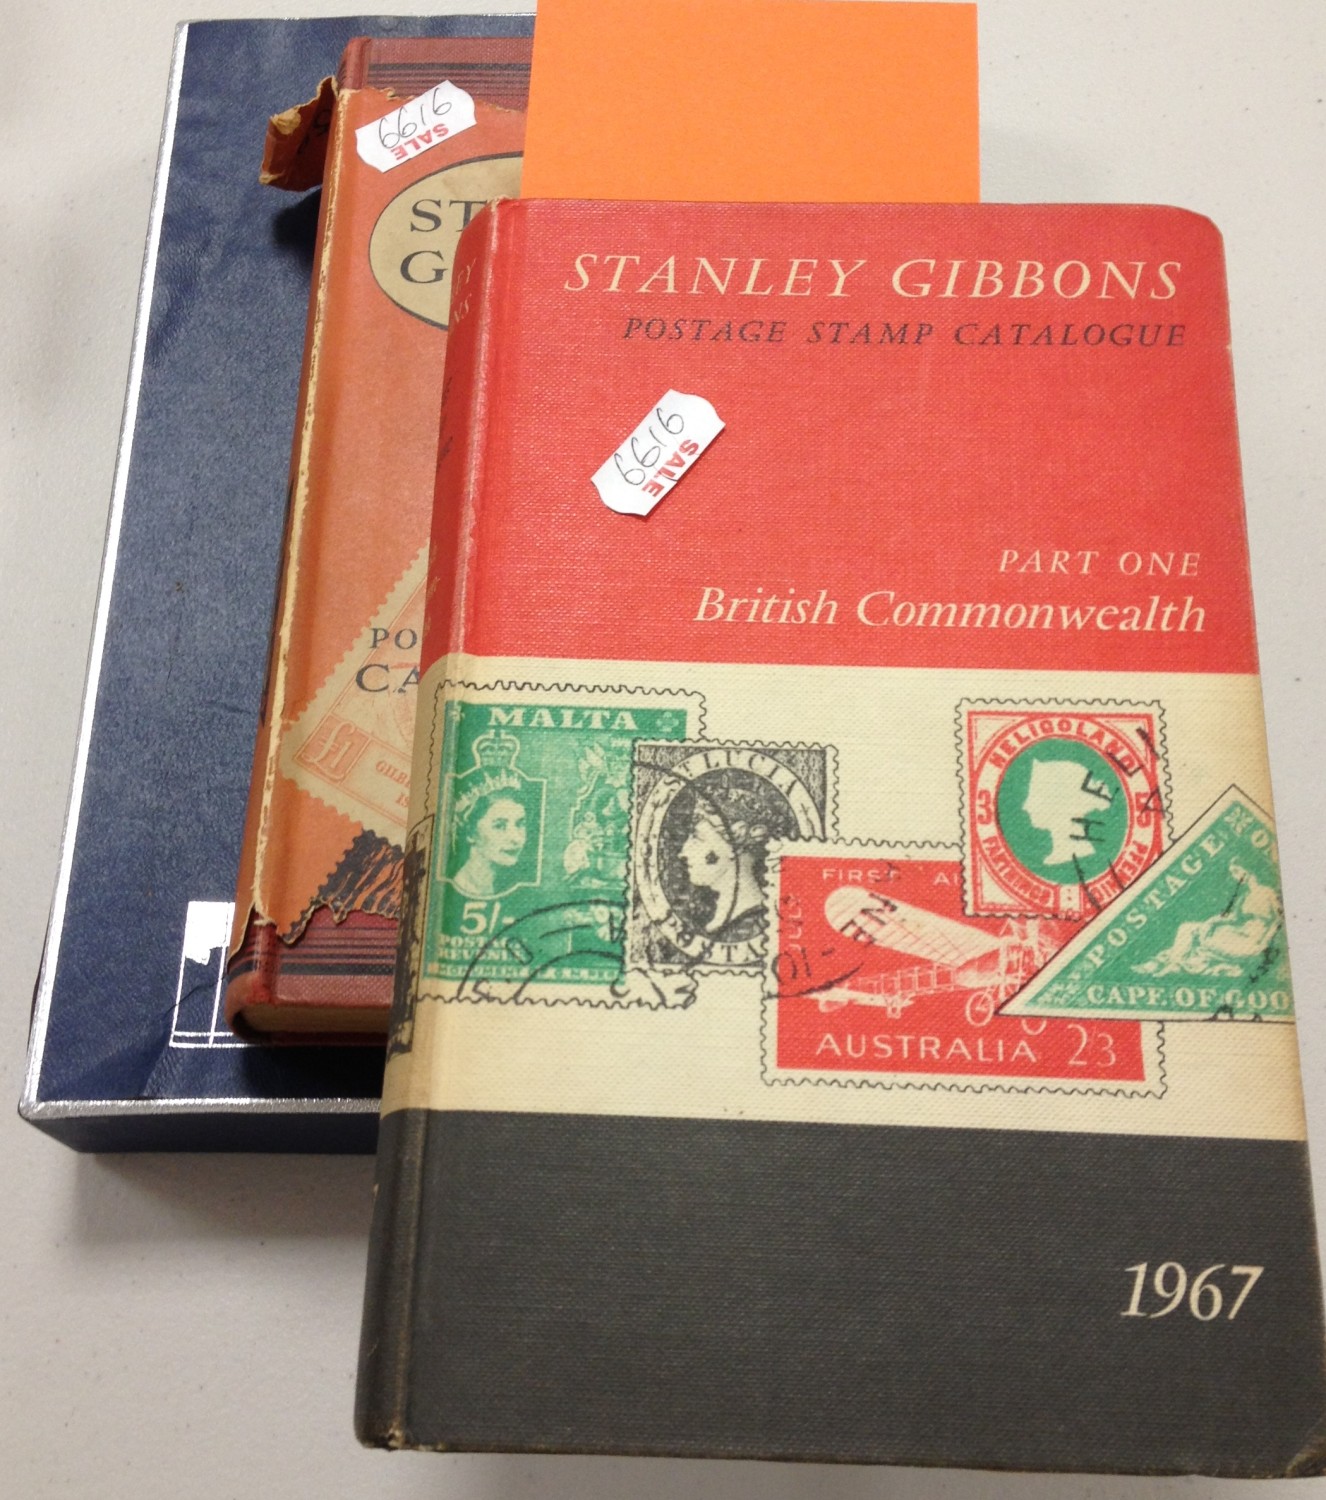 Two Stanley Gibbons Catalogues and Box of Stamps